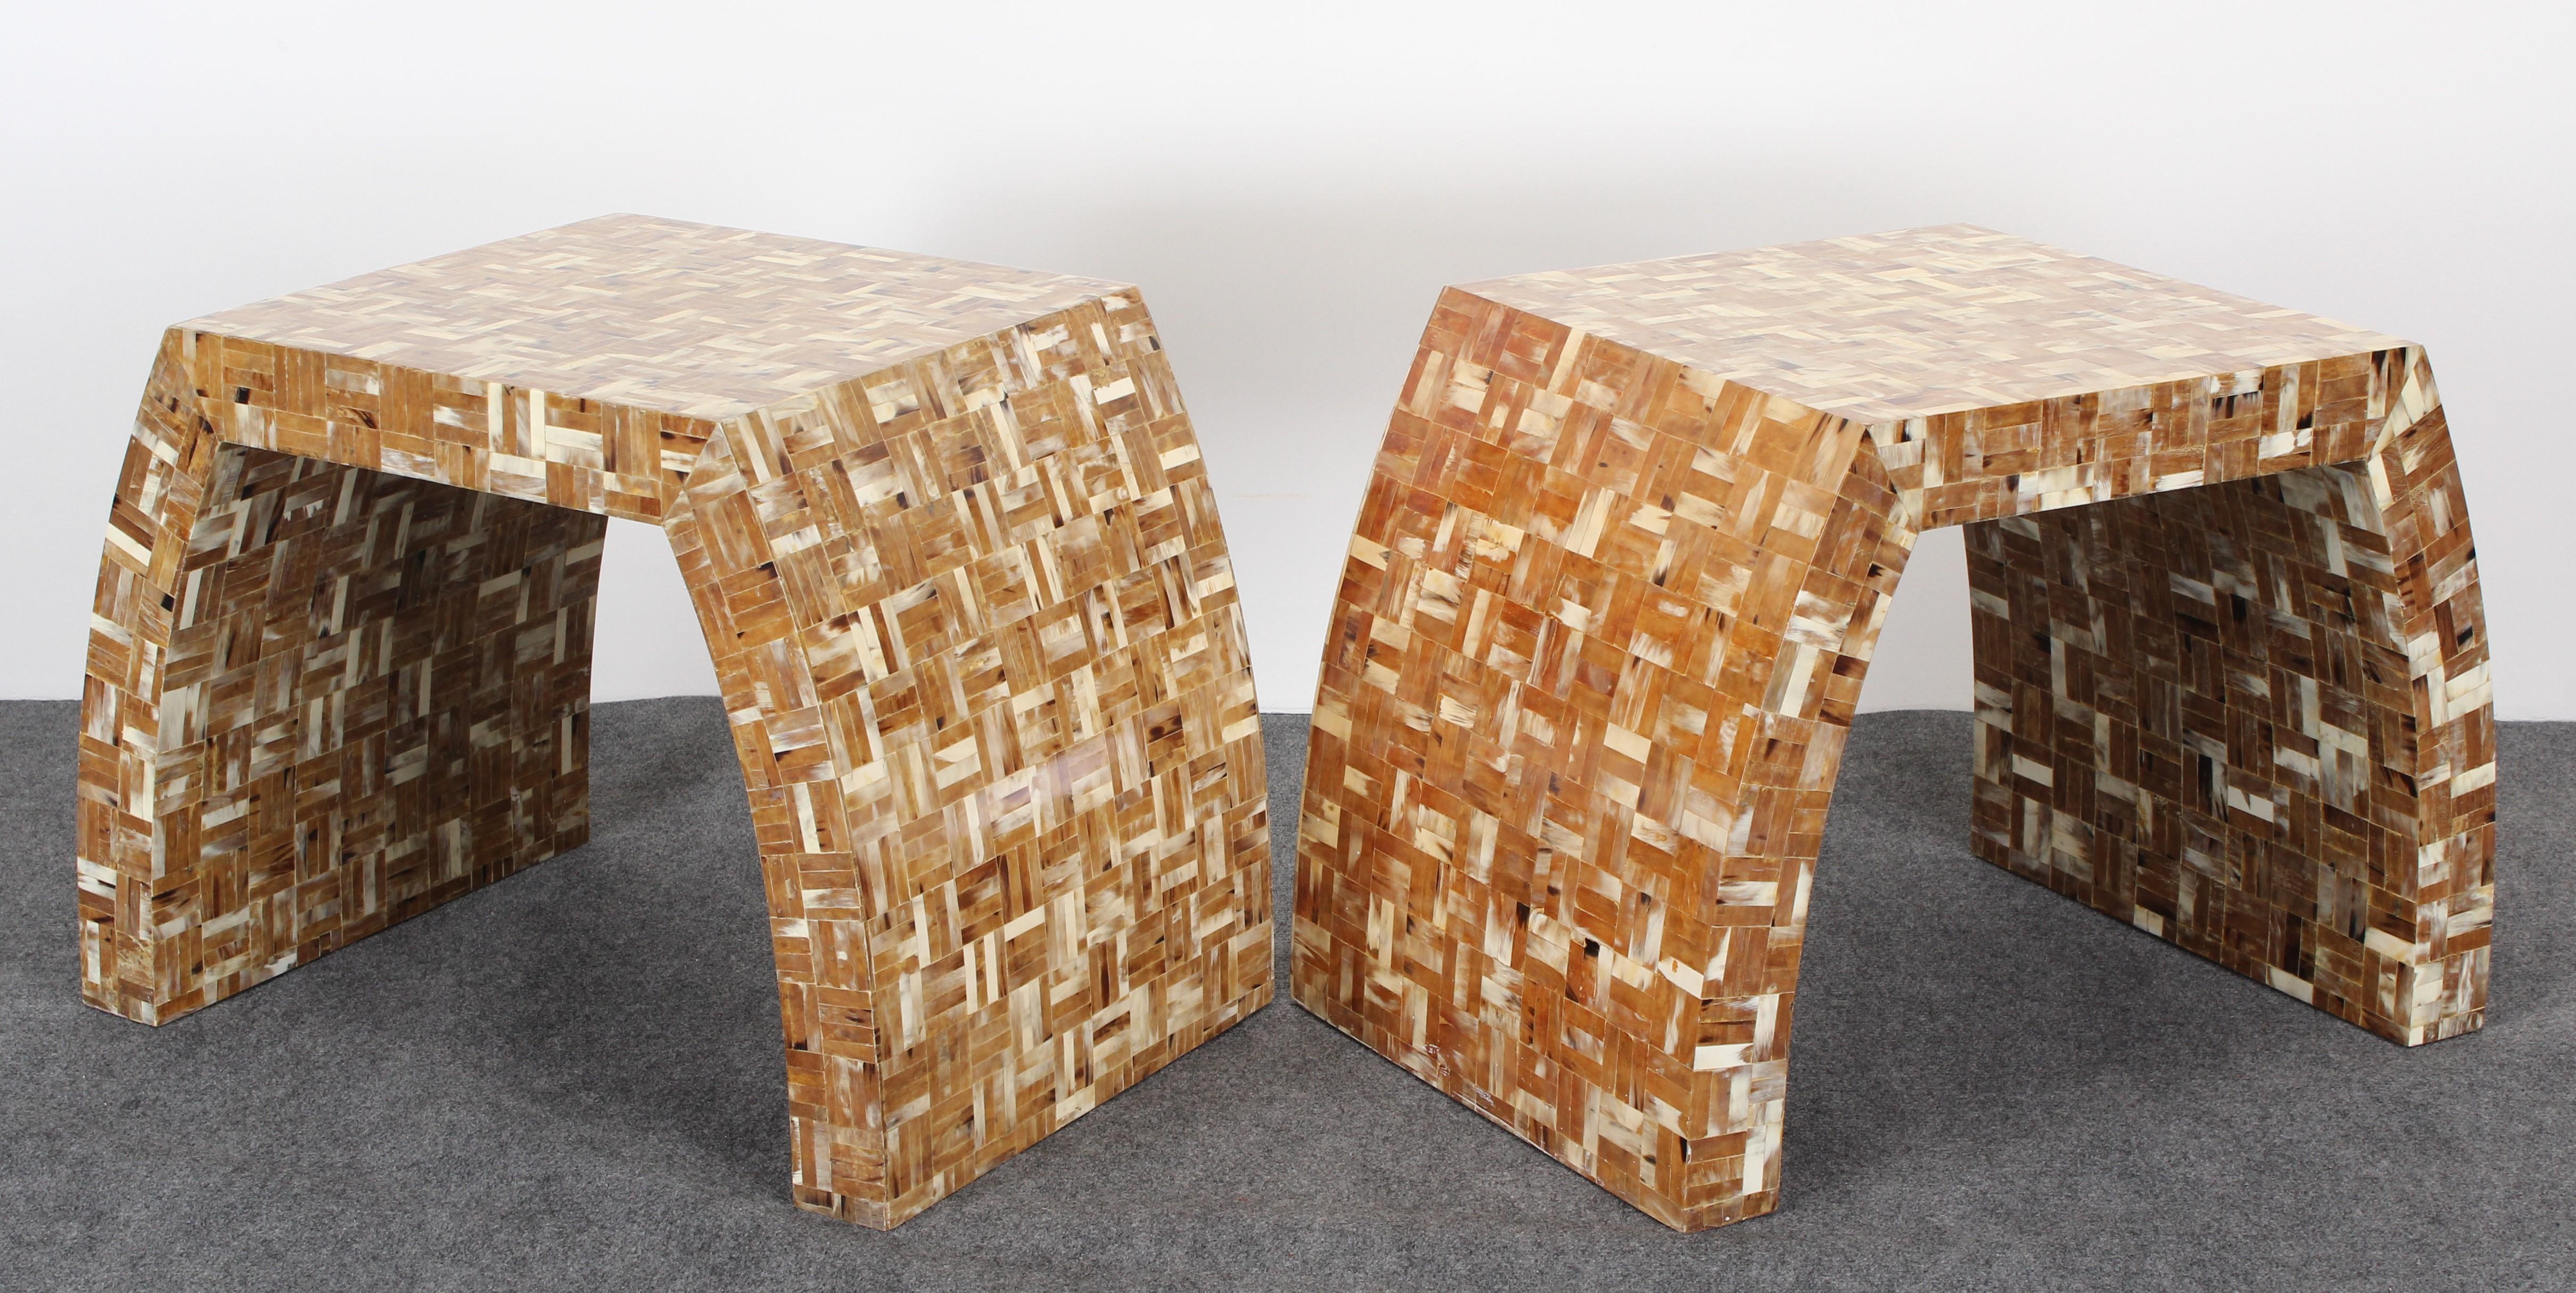 An exquisite pair of Enrique Garcel tessellated horn side tables or end tables. These pieces have an impressive scale and an interesting design. Very good condition with age appropriate wear.

Dimensions: 26